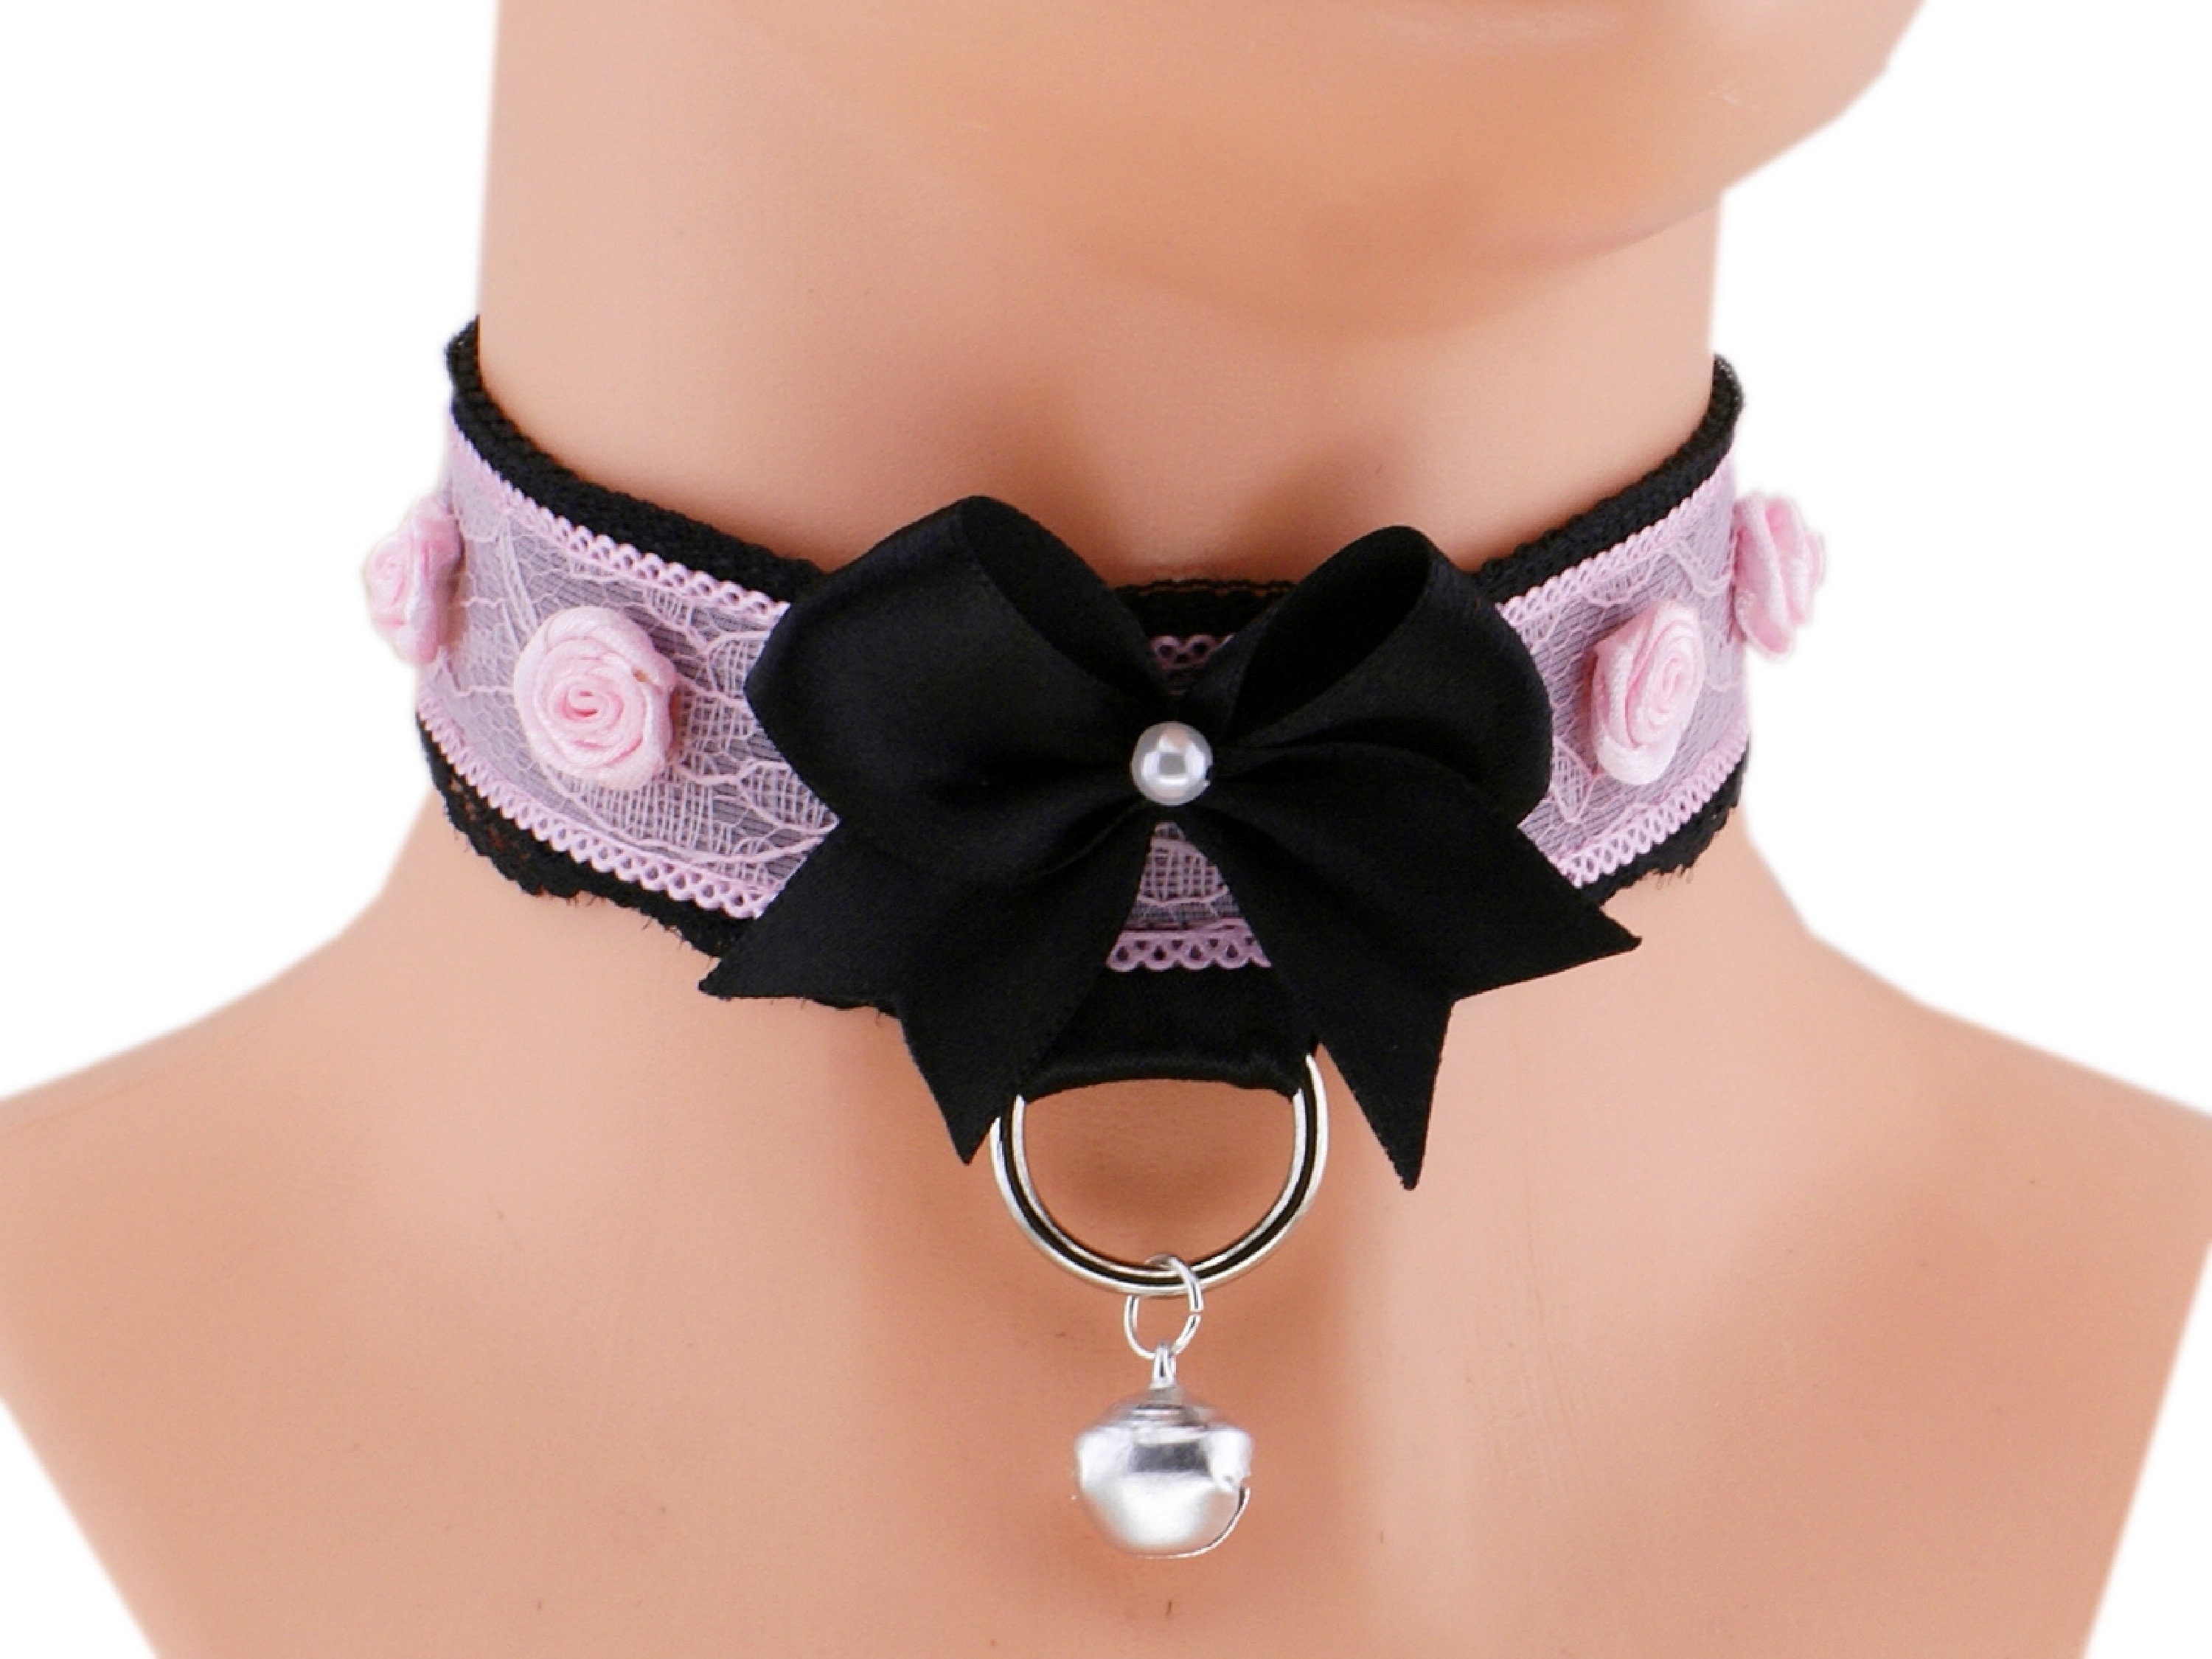 Black Victorian Lace Choker Collar - Wide Gothic Wedding Ribbon Necklace